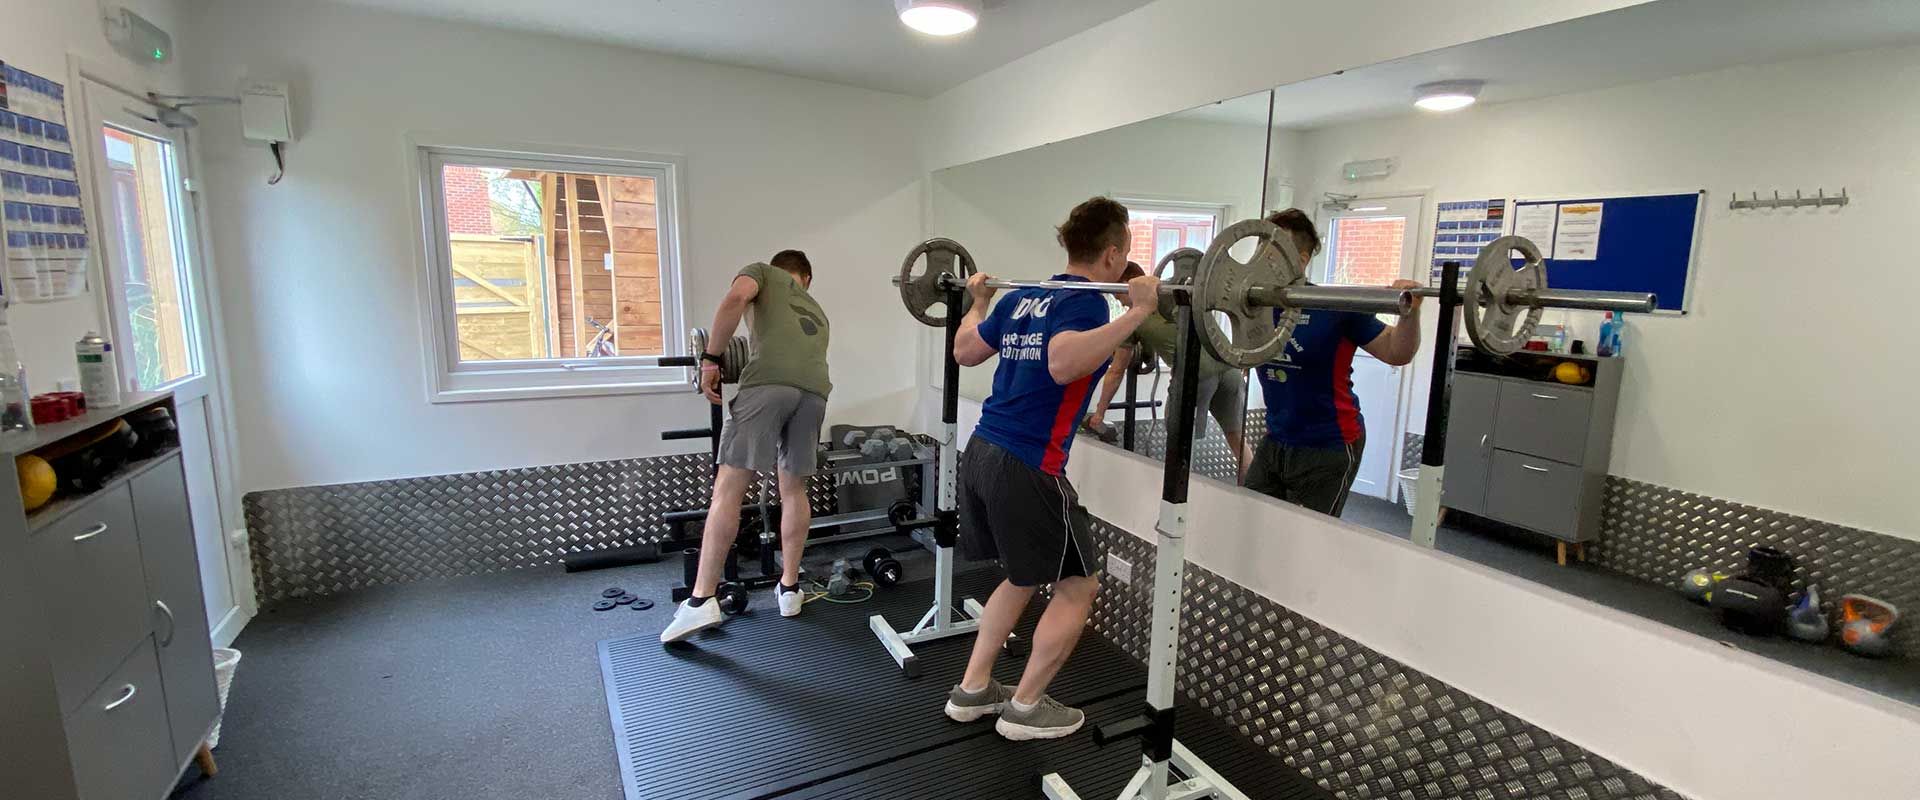 Kingfisher Halls Loughborough student accommodation - Workout whenever you wish thanks to our onsite gym 